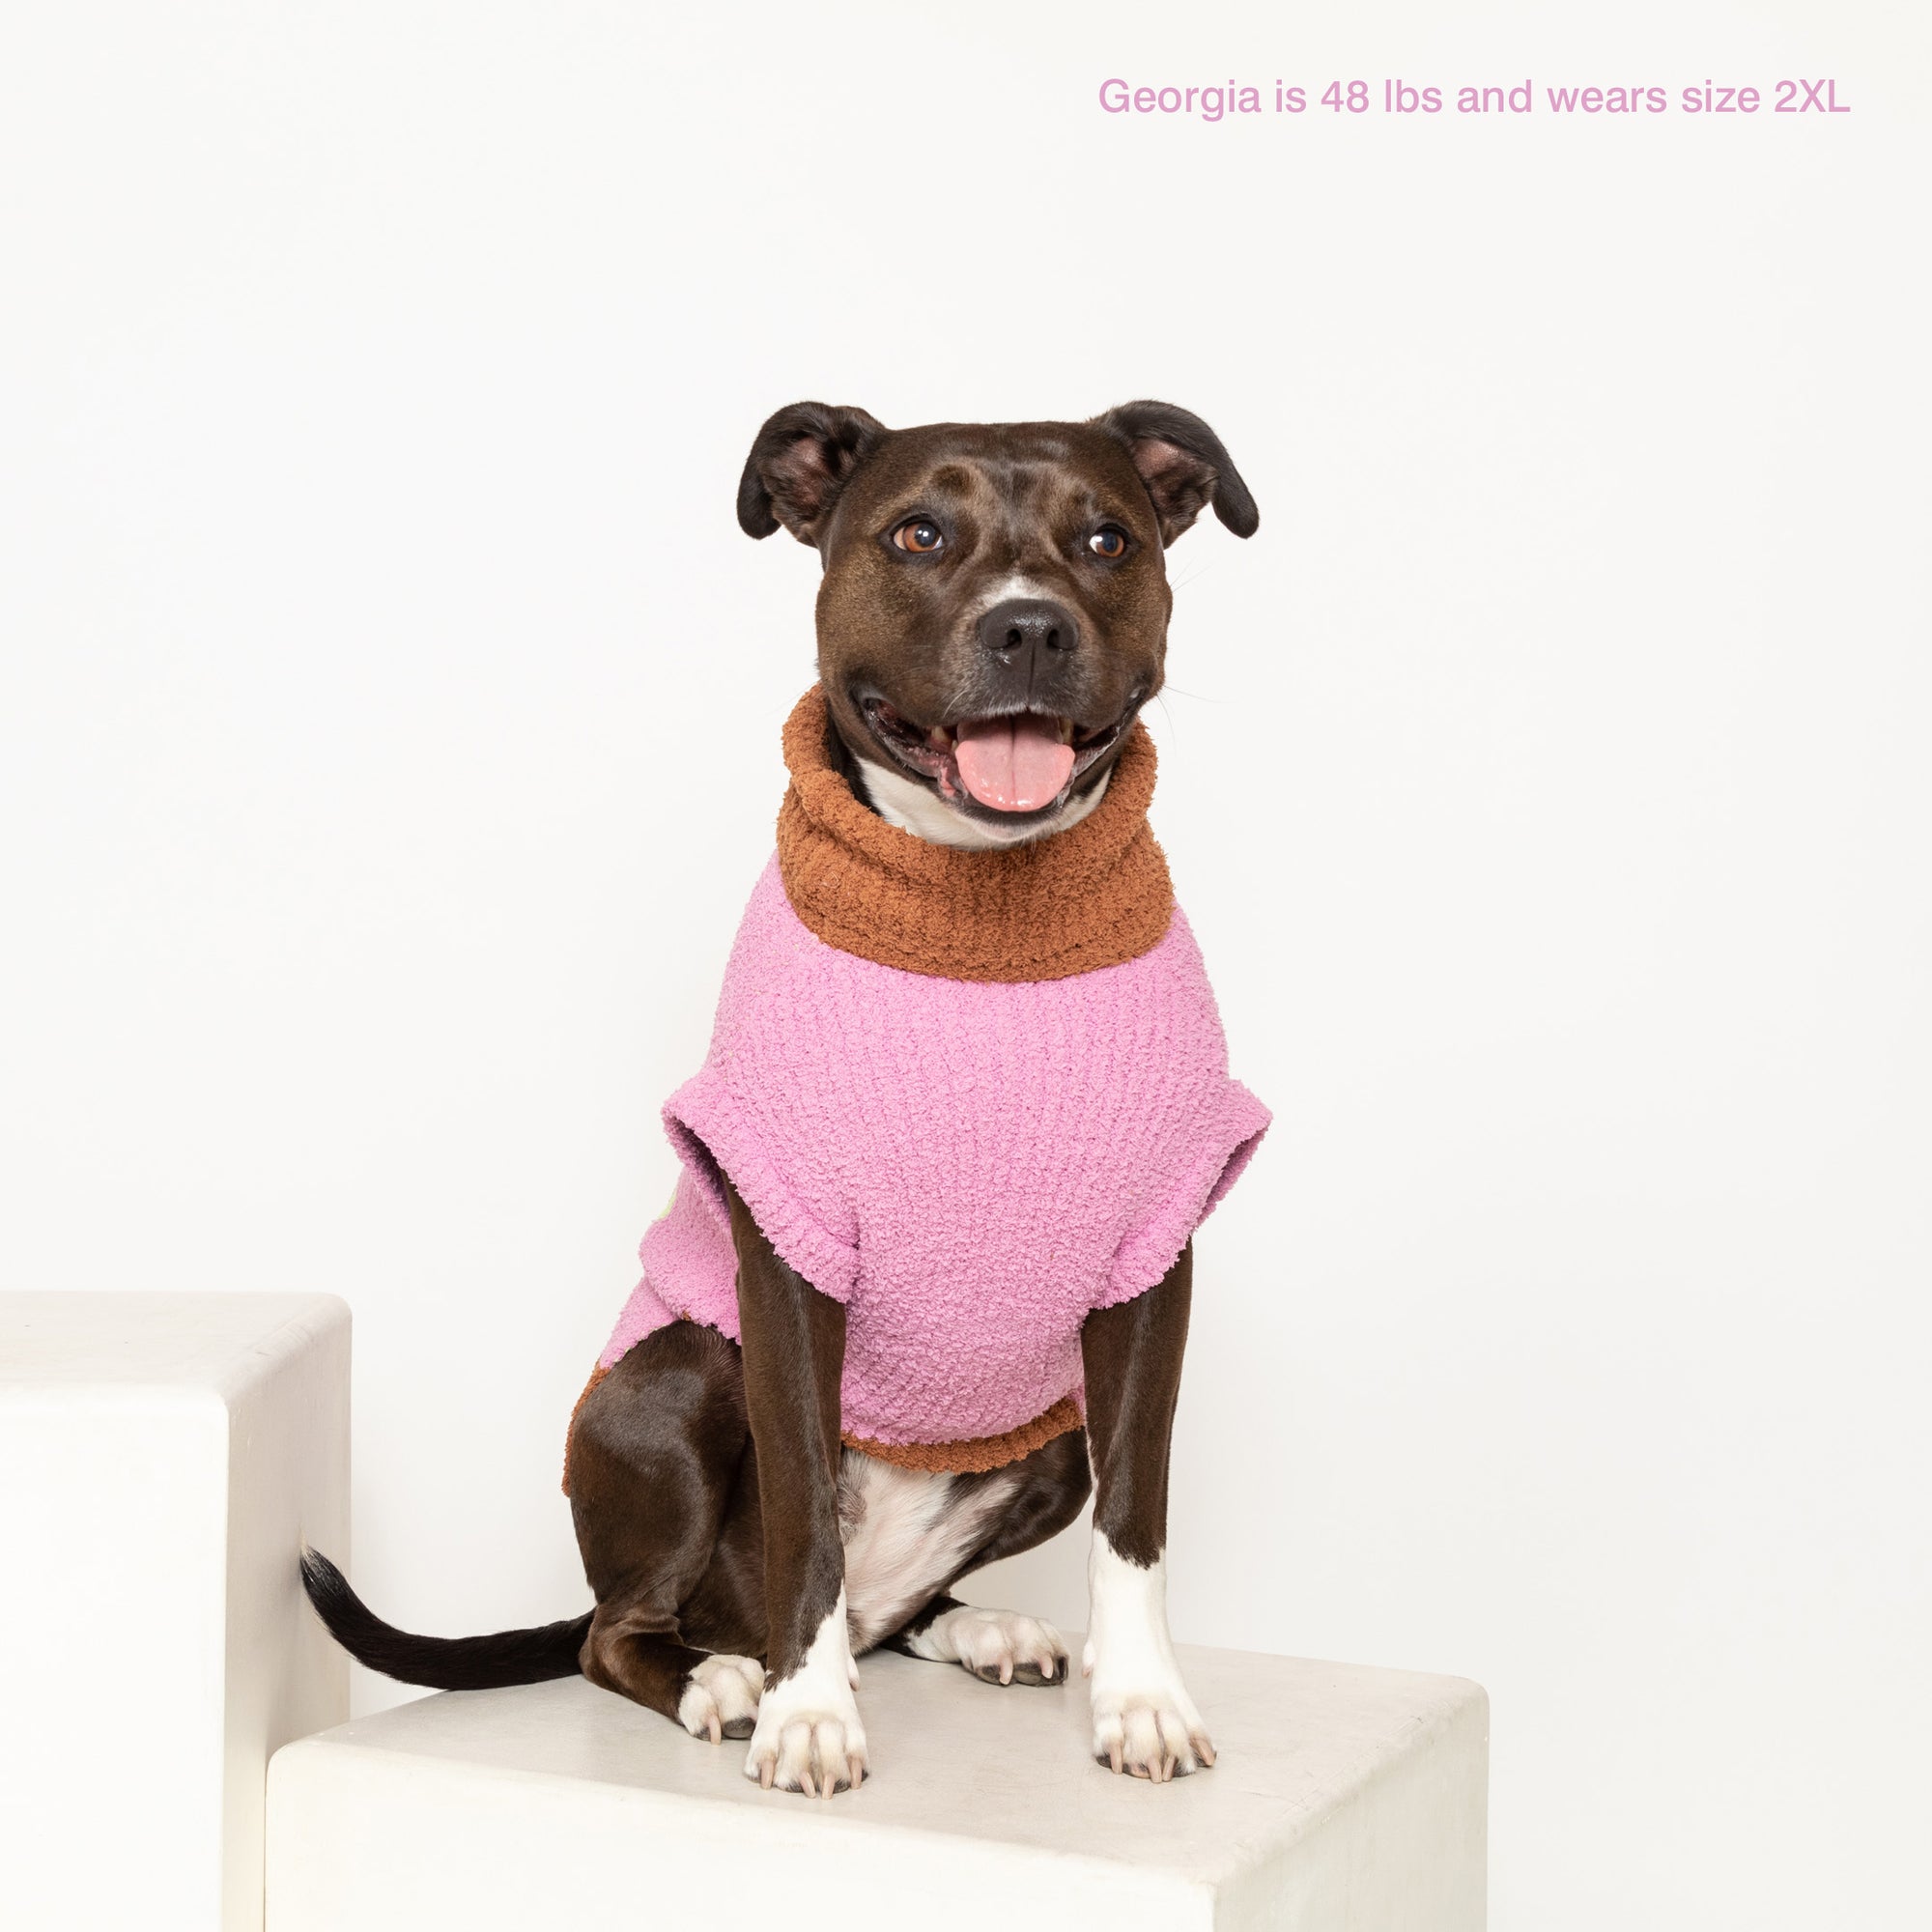  Dog named Georgia, 48 lbs, in a 2XL pink "The Furryfolks" Hey sweater, seated on a white block.